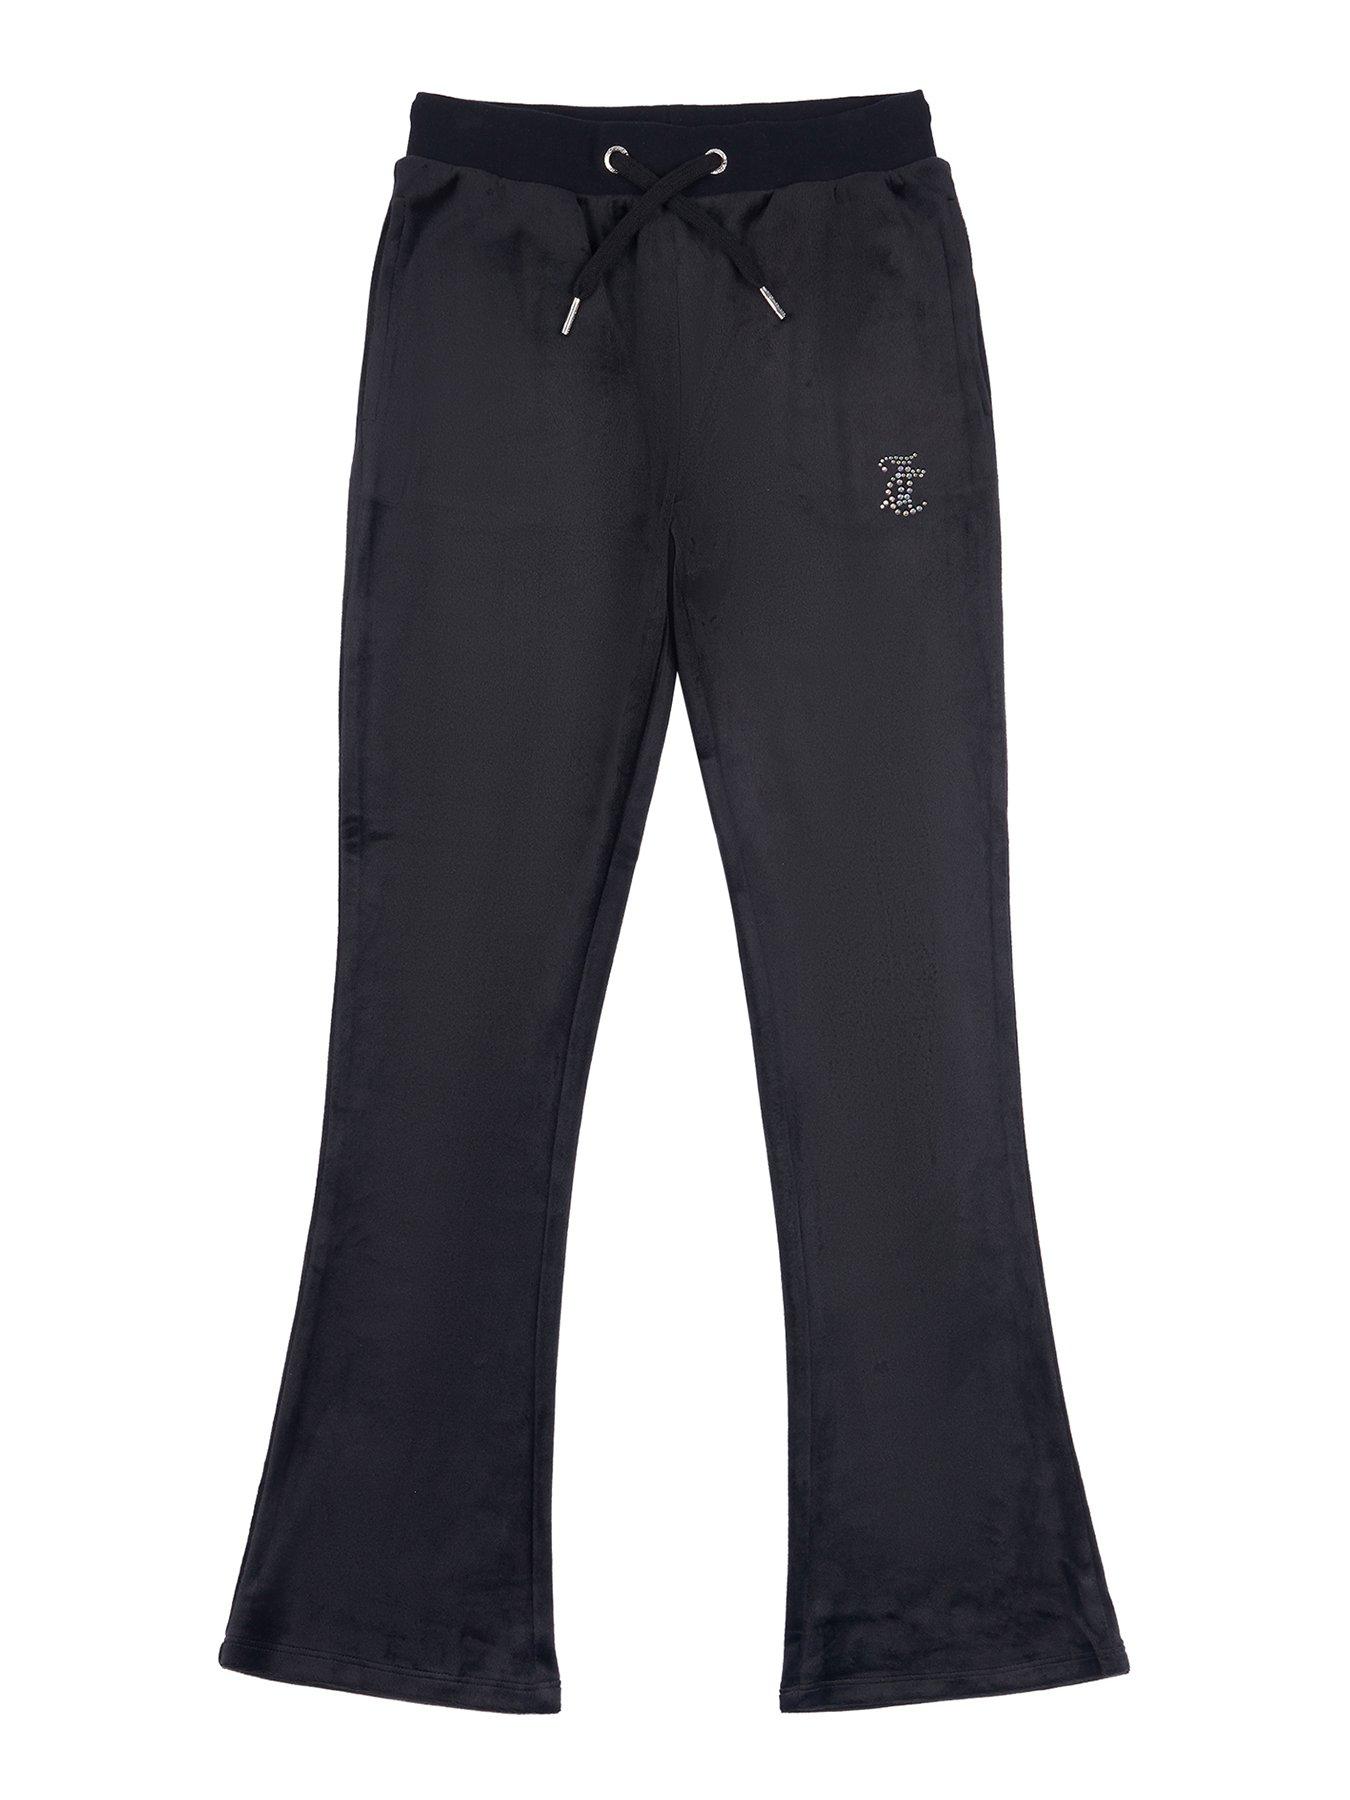 32 Degrees Velour Athletic Sweat Pants for Women